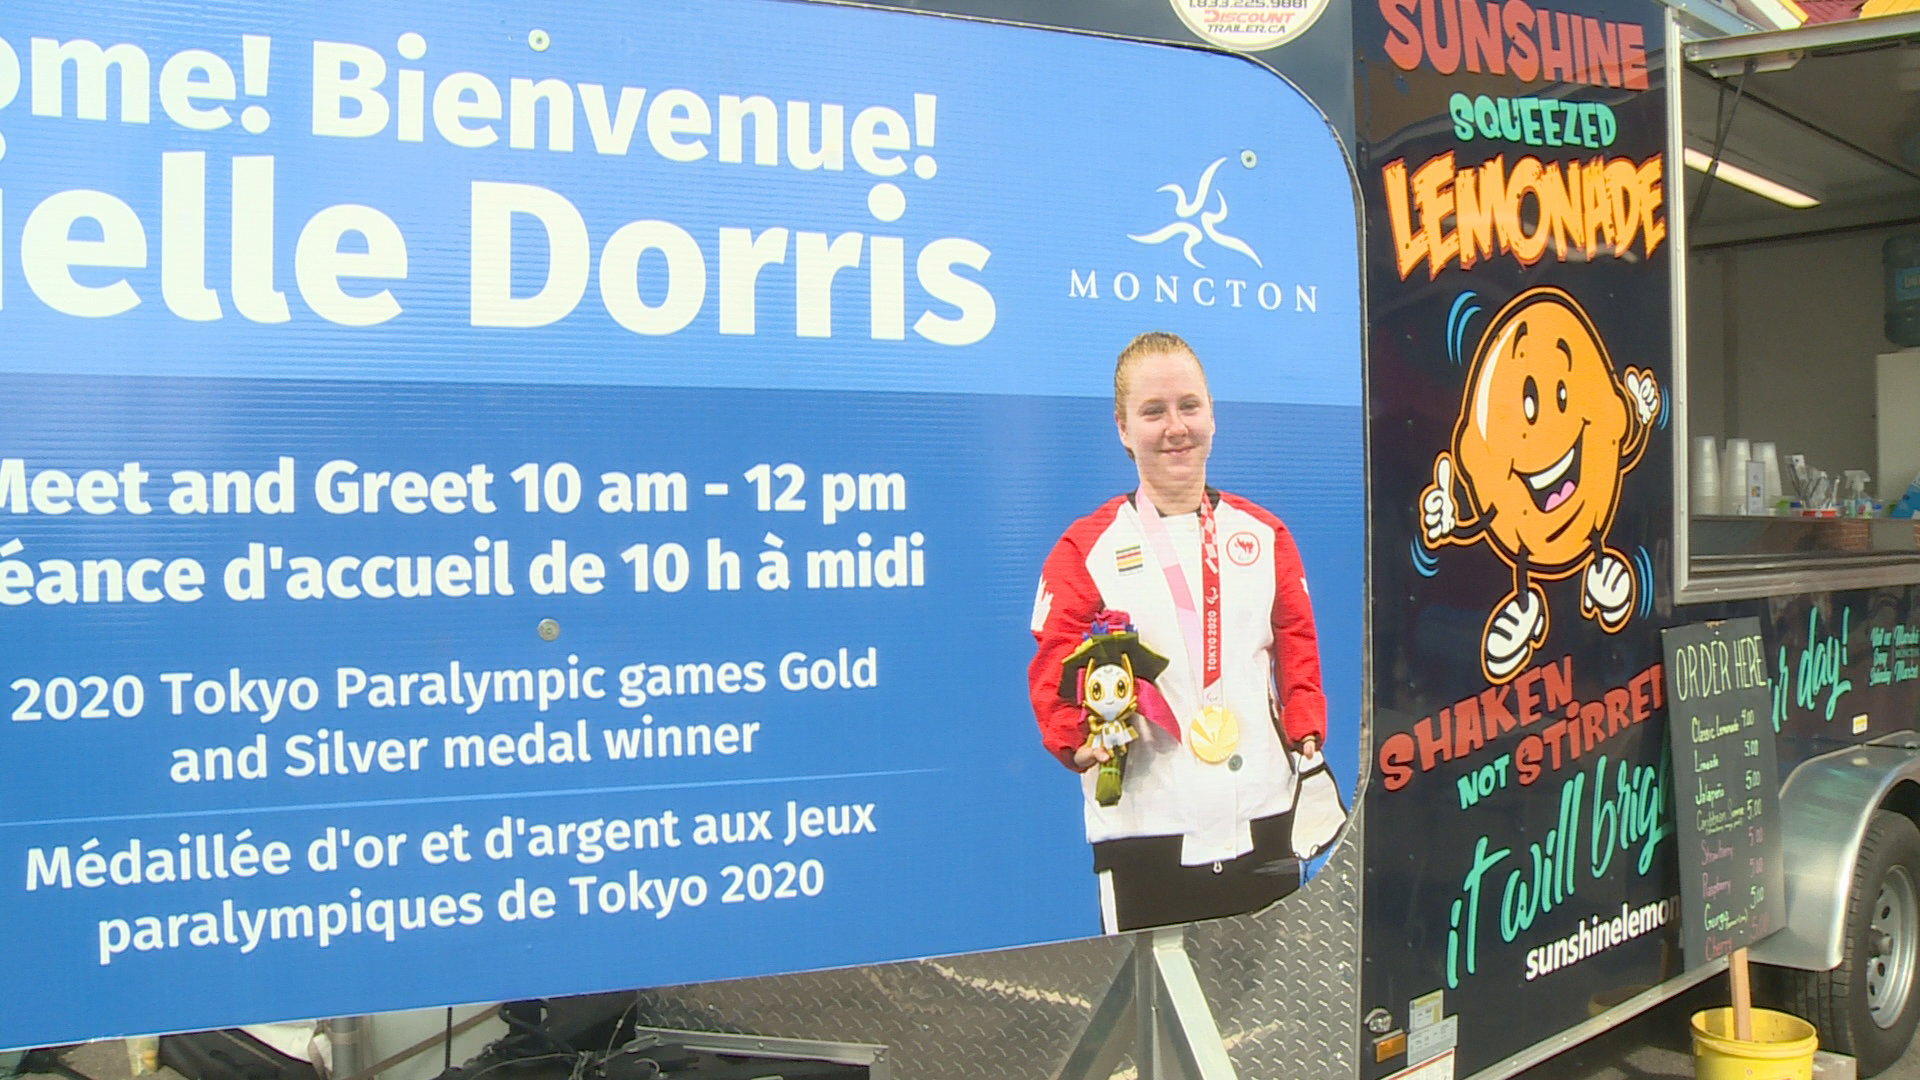 Danielle Dorris meets with Moncton fans after capturing 2 Paralympic medals